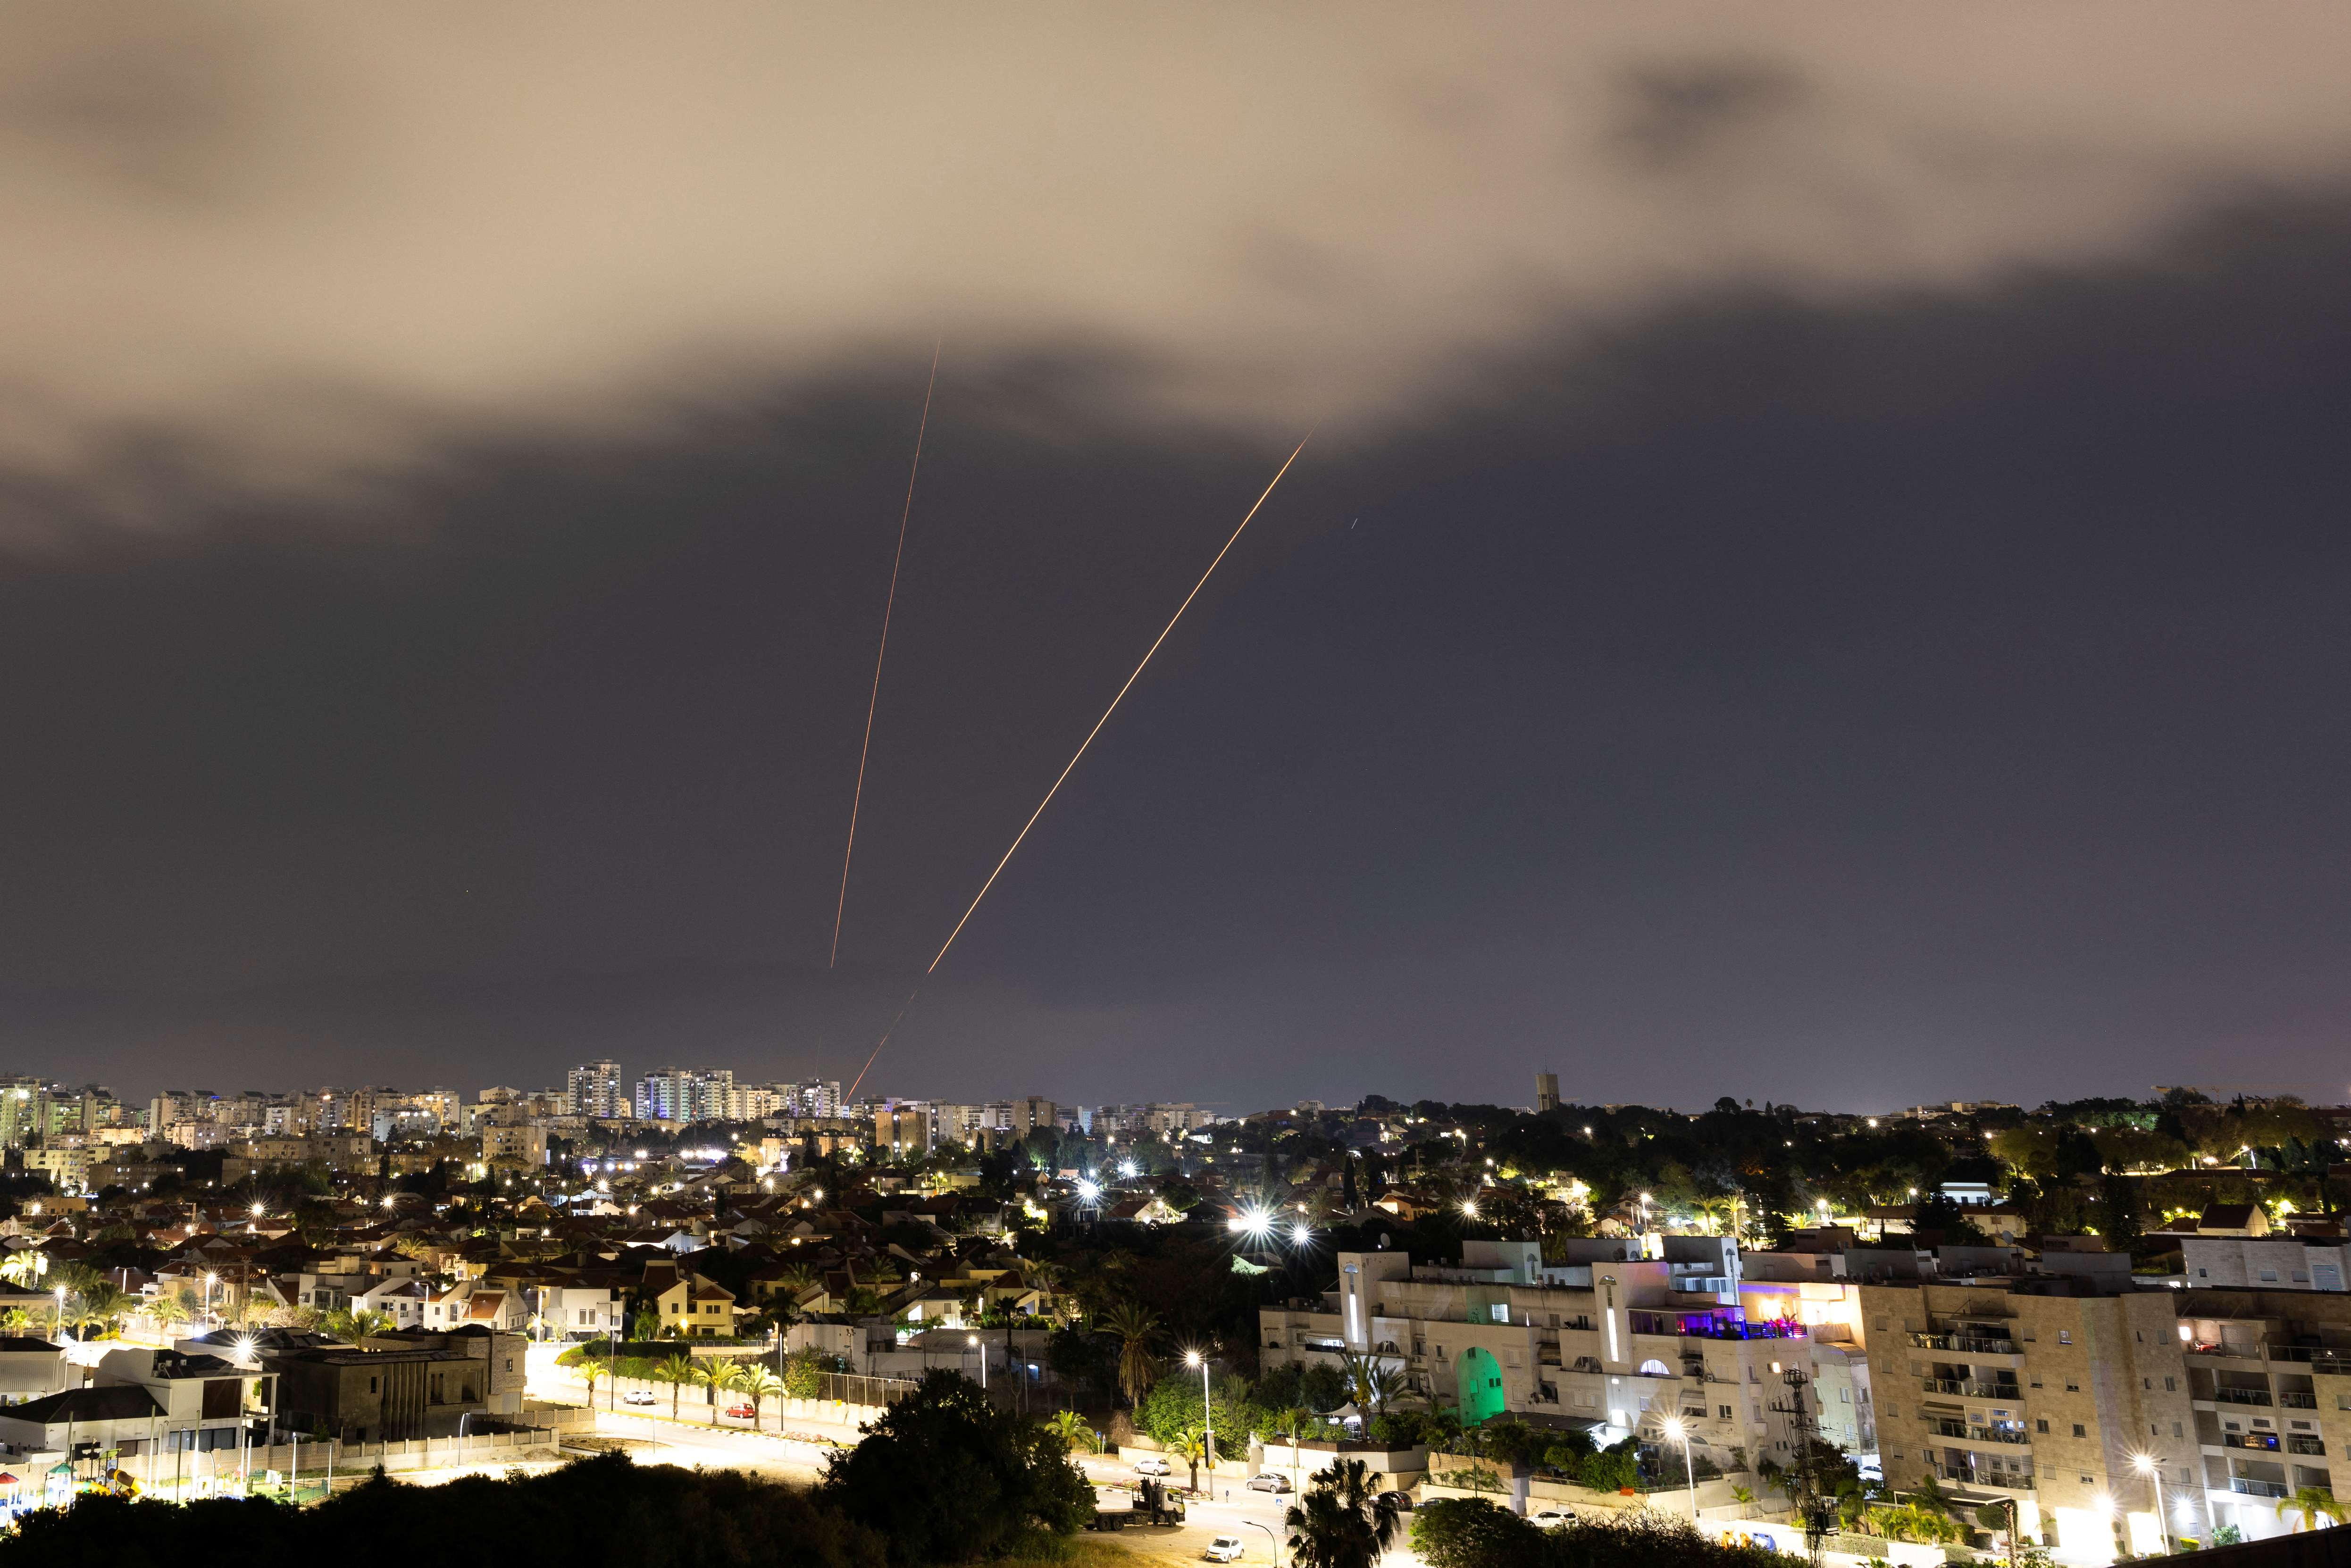 An anti-missile system operates after Iran launched drones and missiles towards Israel, as seen from Ashkelon on April 14